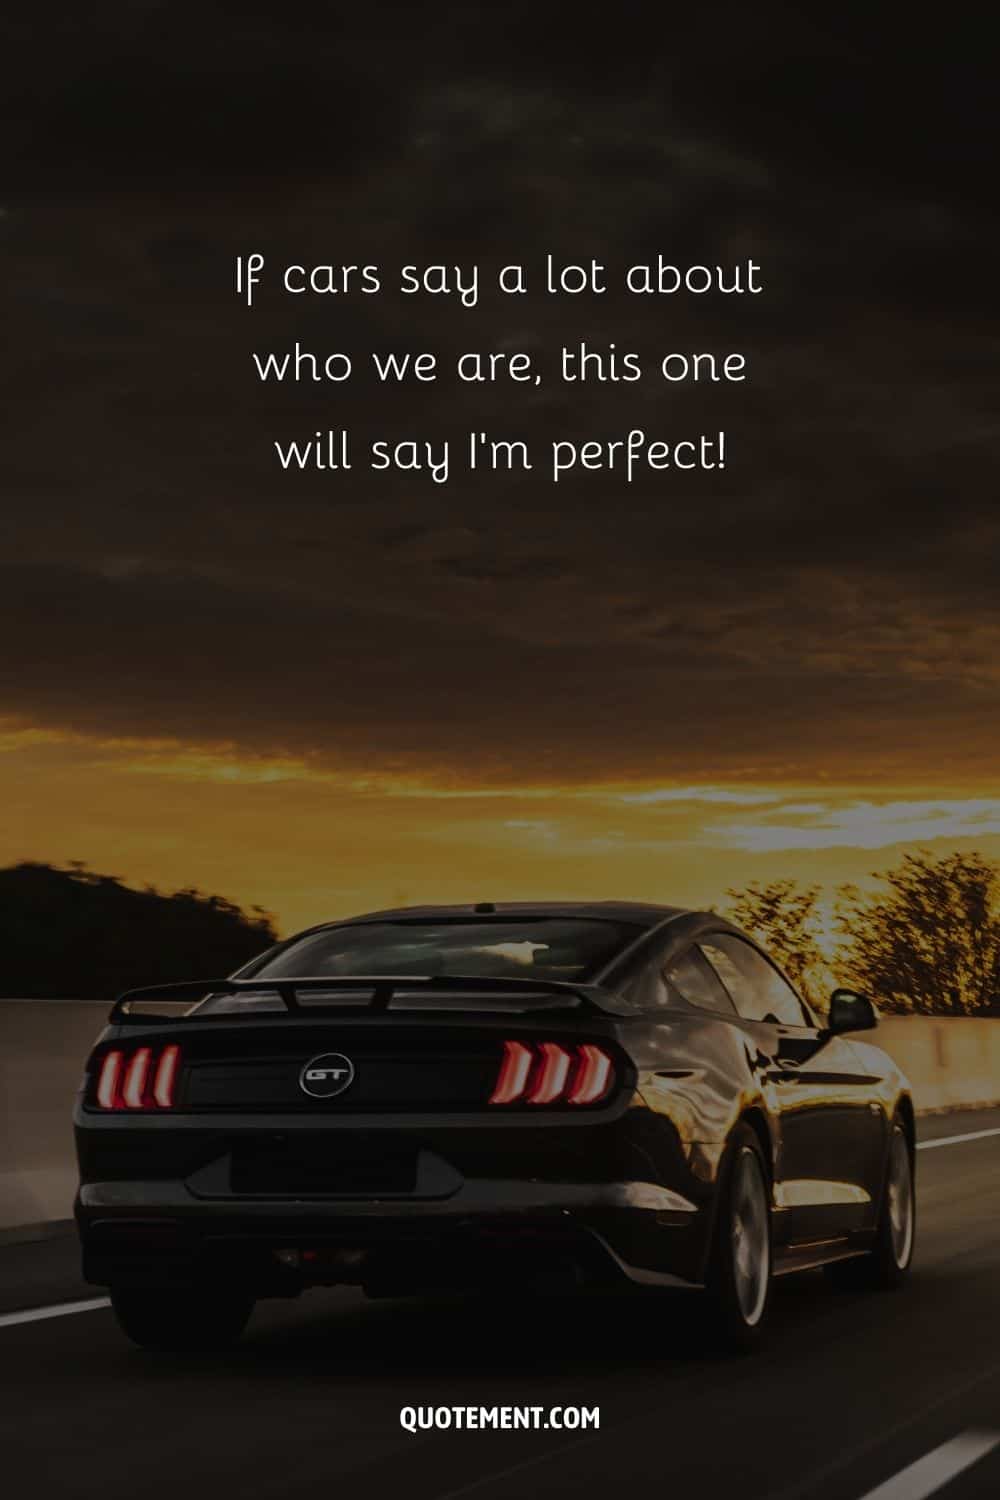 “If cars say a lot about who we are, this one will say I’m perfect!”